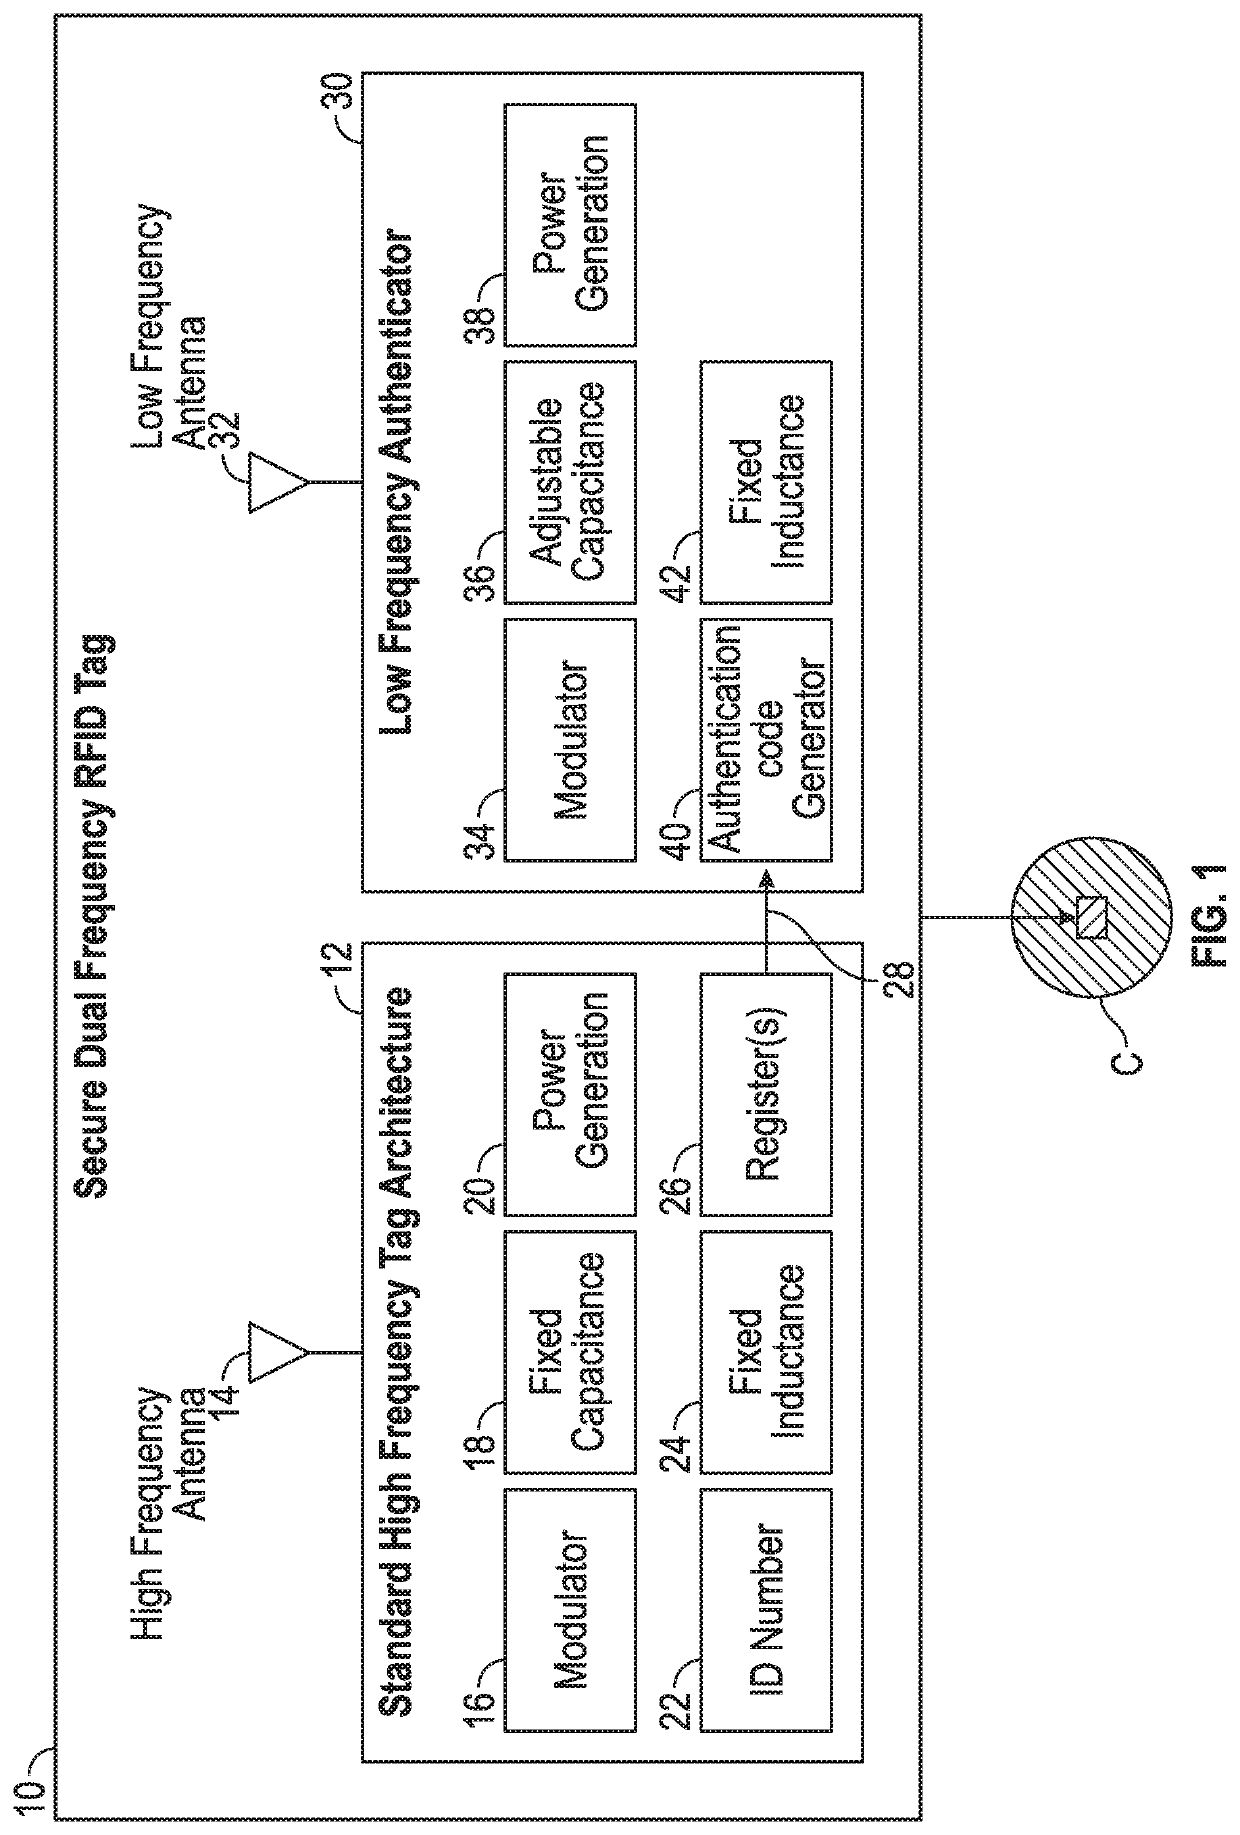 RFID Device with Dual Frequency Interrogation for Enhanced Security and Method of Preventing Counterfeiting of RFID Devices